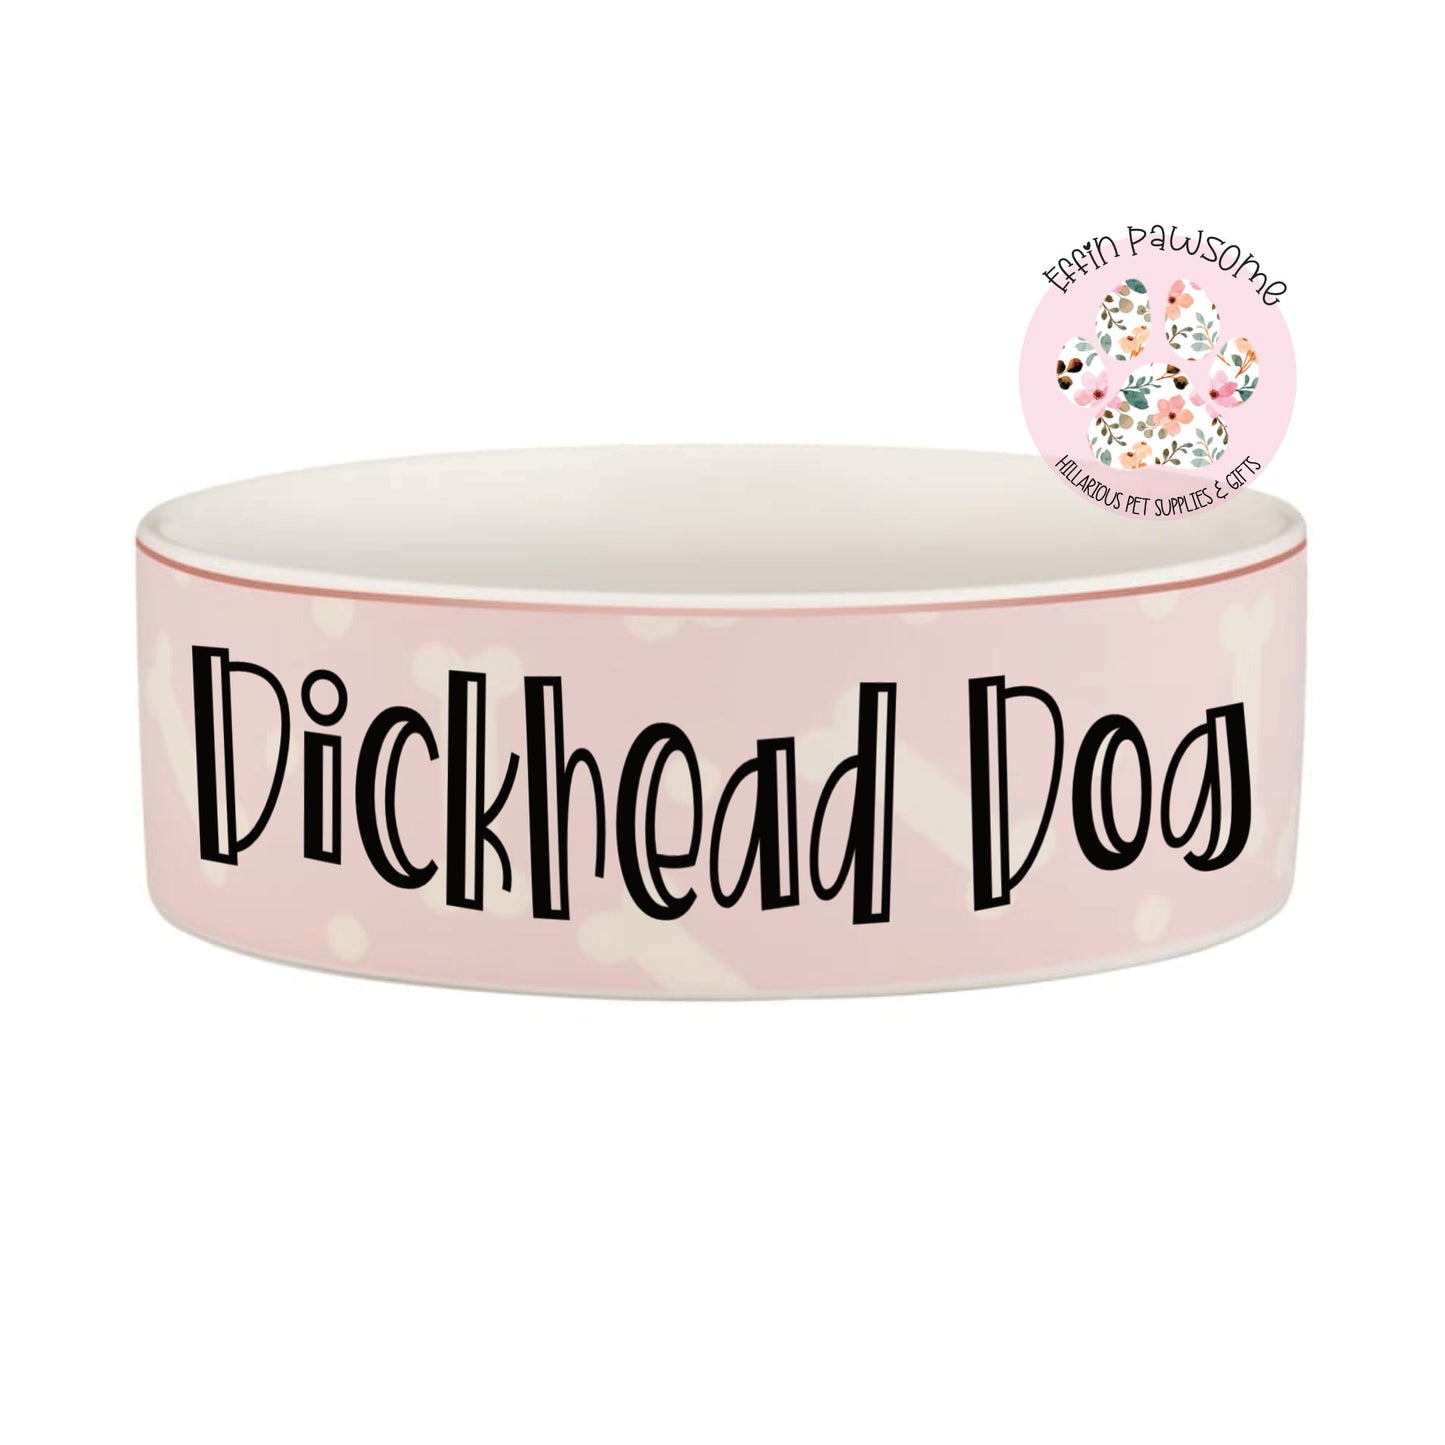 Dickhead Dog | Ceramic Pet Feeding Bowl | Pet Accessories | Feeding Supplies | Funny Dogs Gift | New Home | Novelty Gift | New Pet Gift